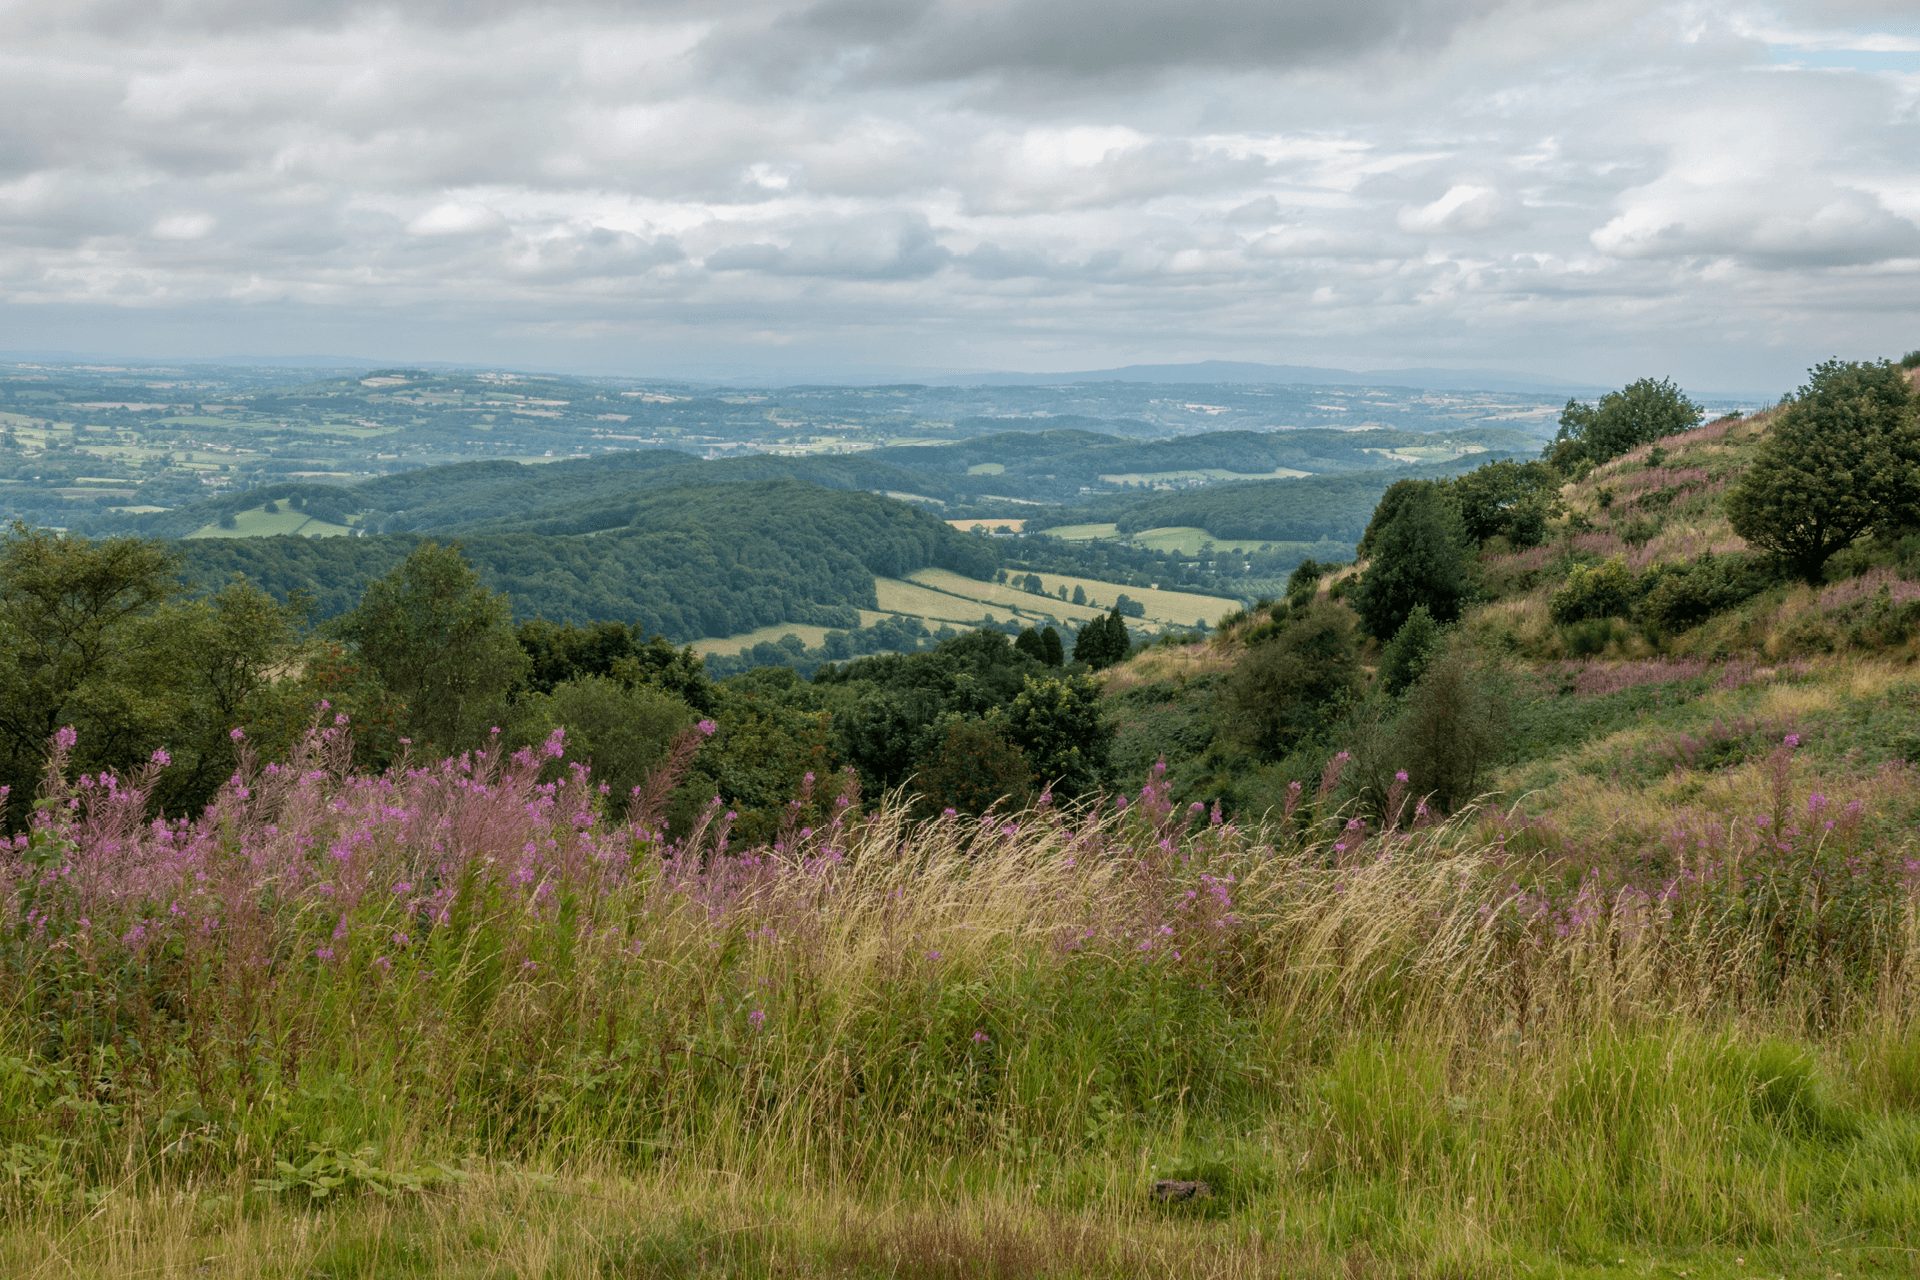 A beautiful view of the Malvern Hills with wild flowers in the foreground